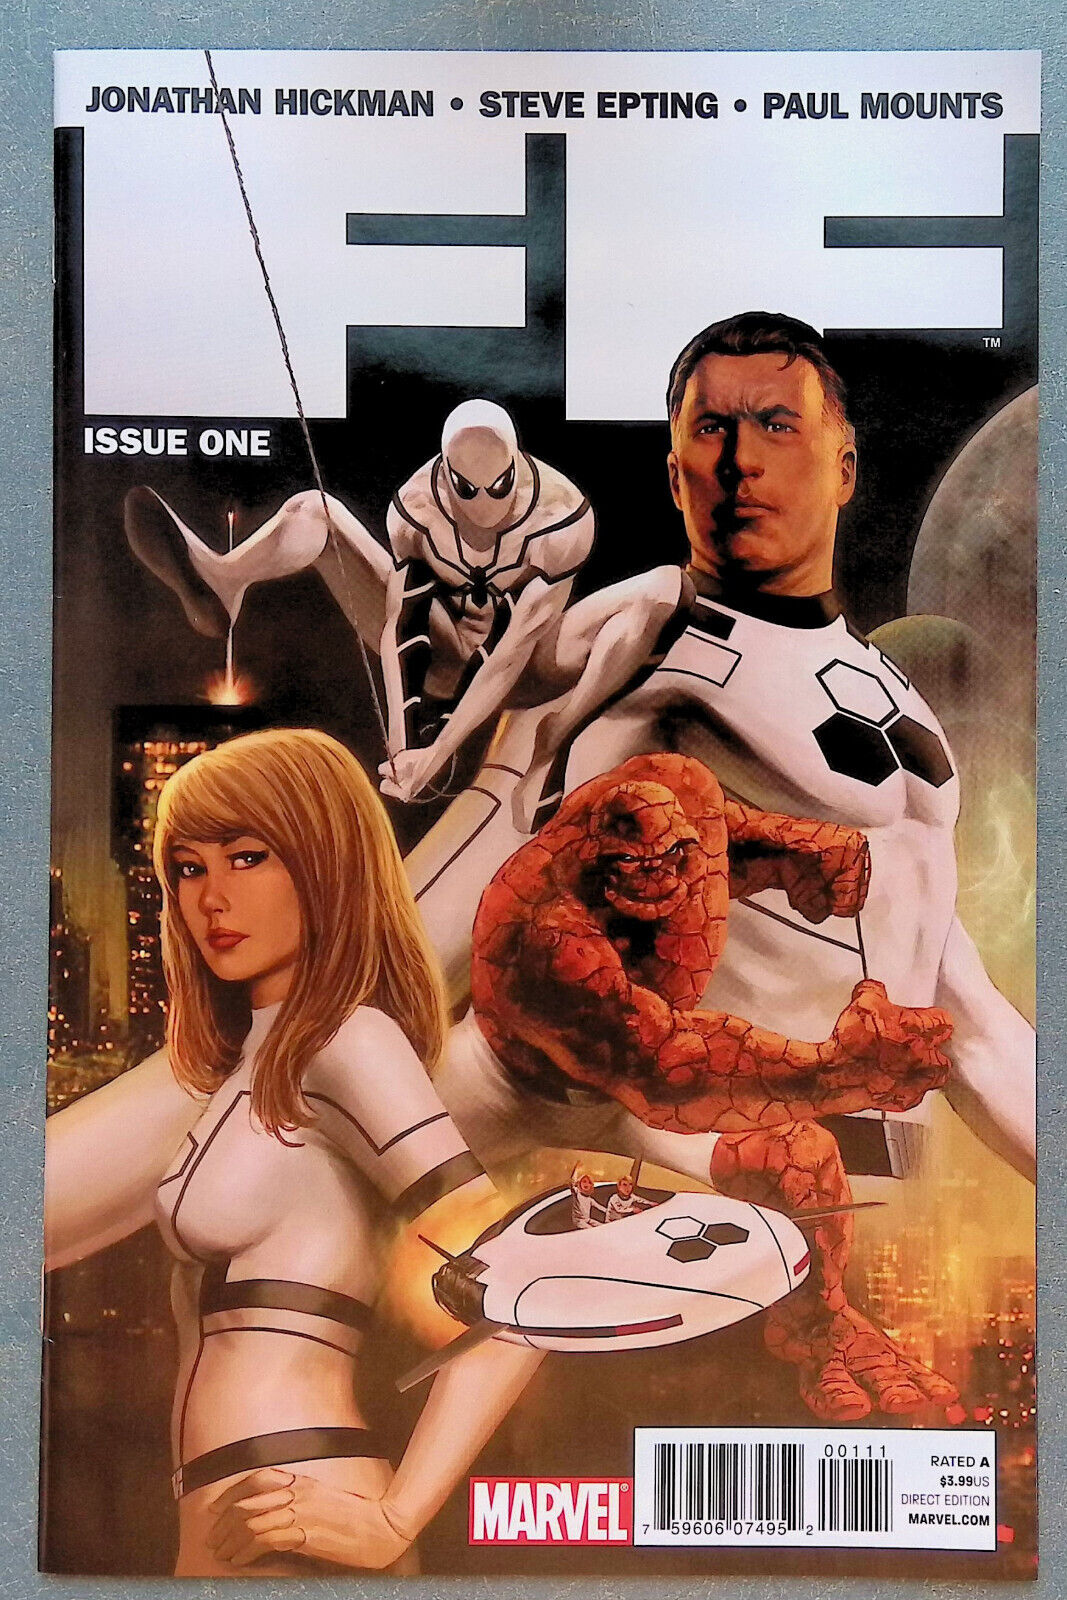 FF 1 Fantastic Four Mr Fantastic Invisible Woman Thing Spider-Man Marvel Comics